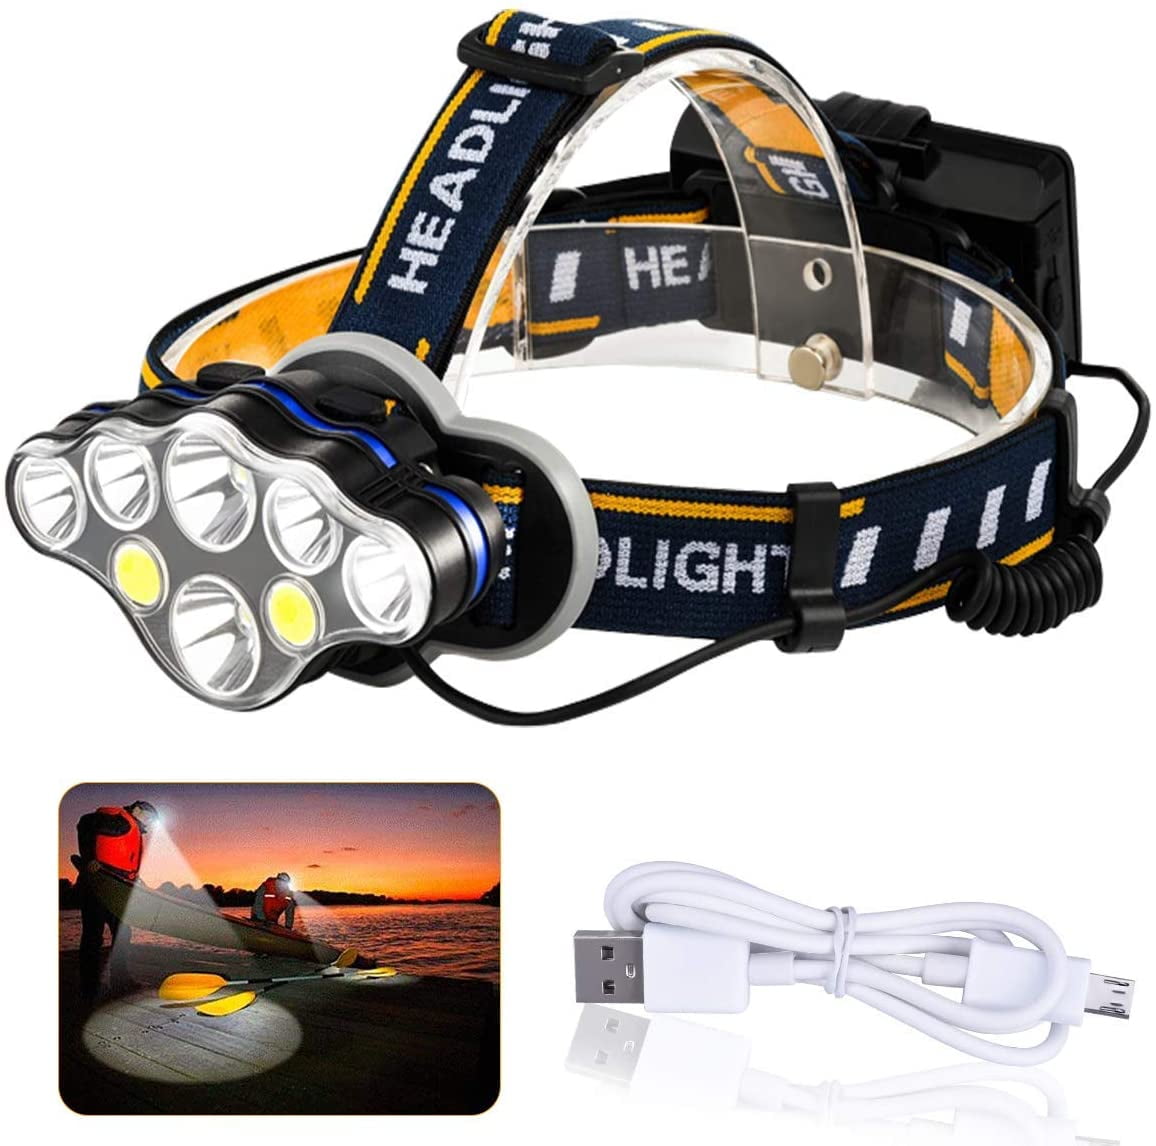 Waterproof Headlight Super Bright Head Torch LED USB Rechargeable Headlamp Camp 